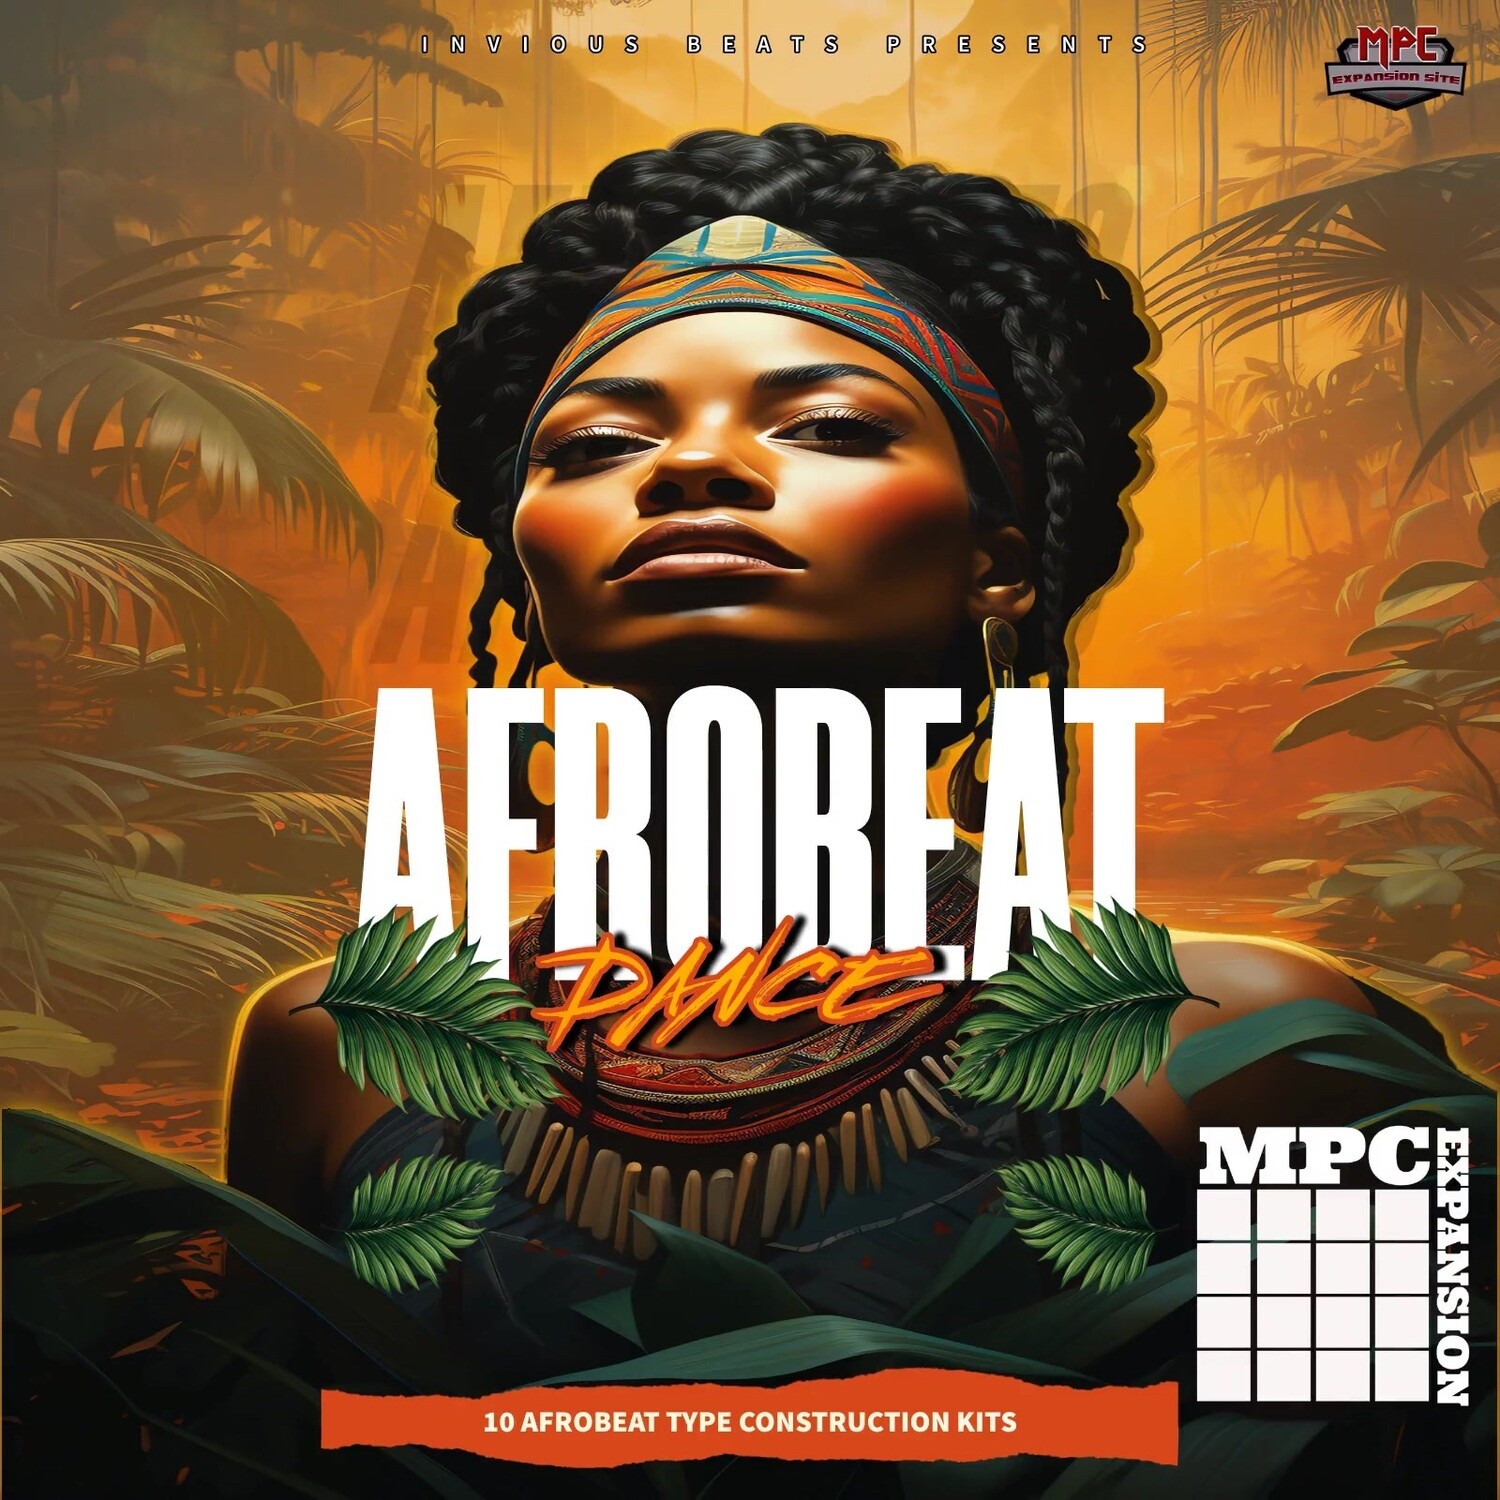 MPC EXPANSION 'AFROBEAT DANCE' by INVIOUS